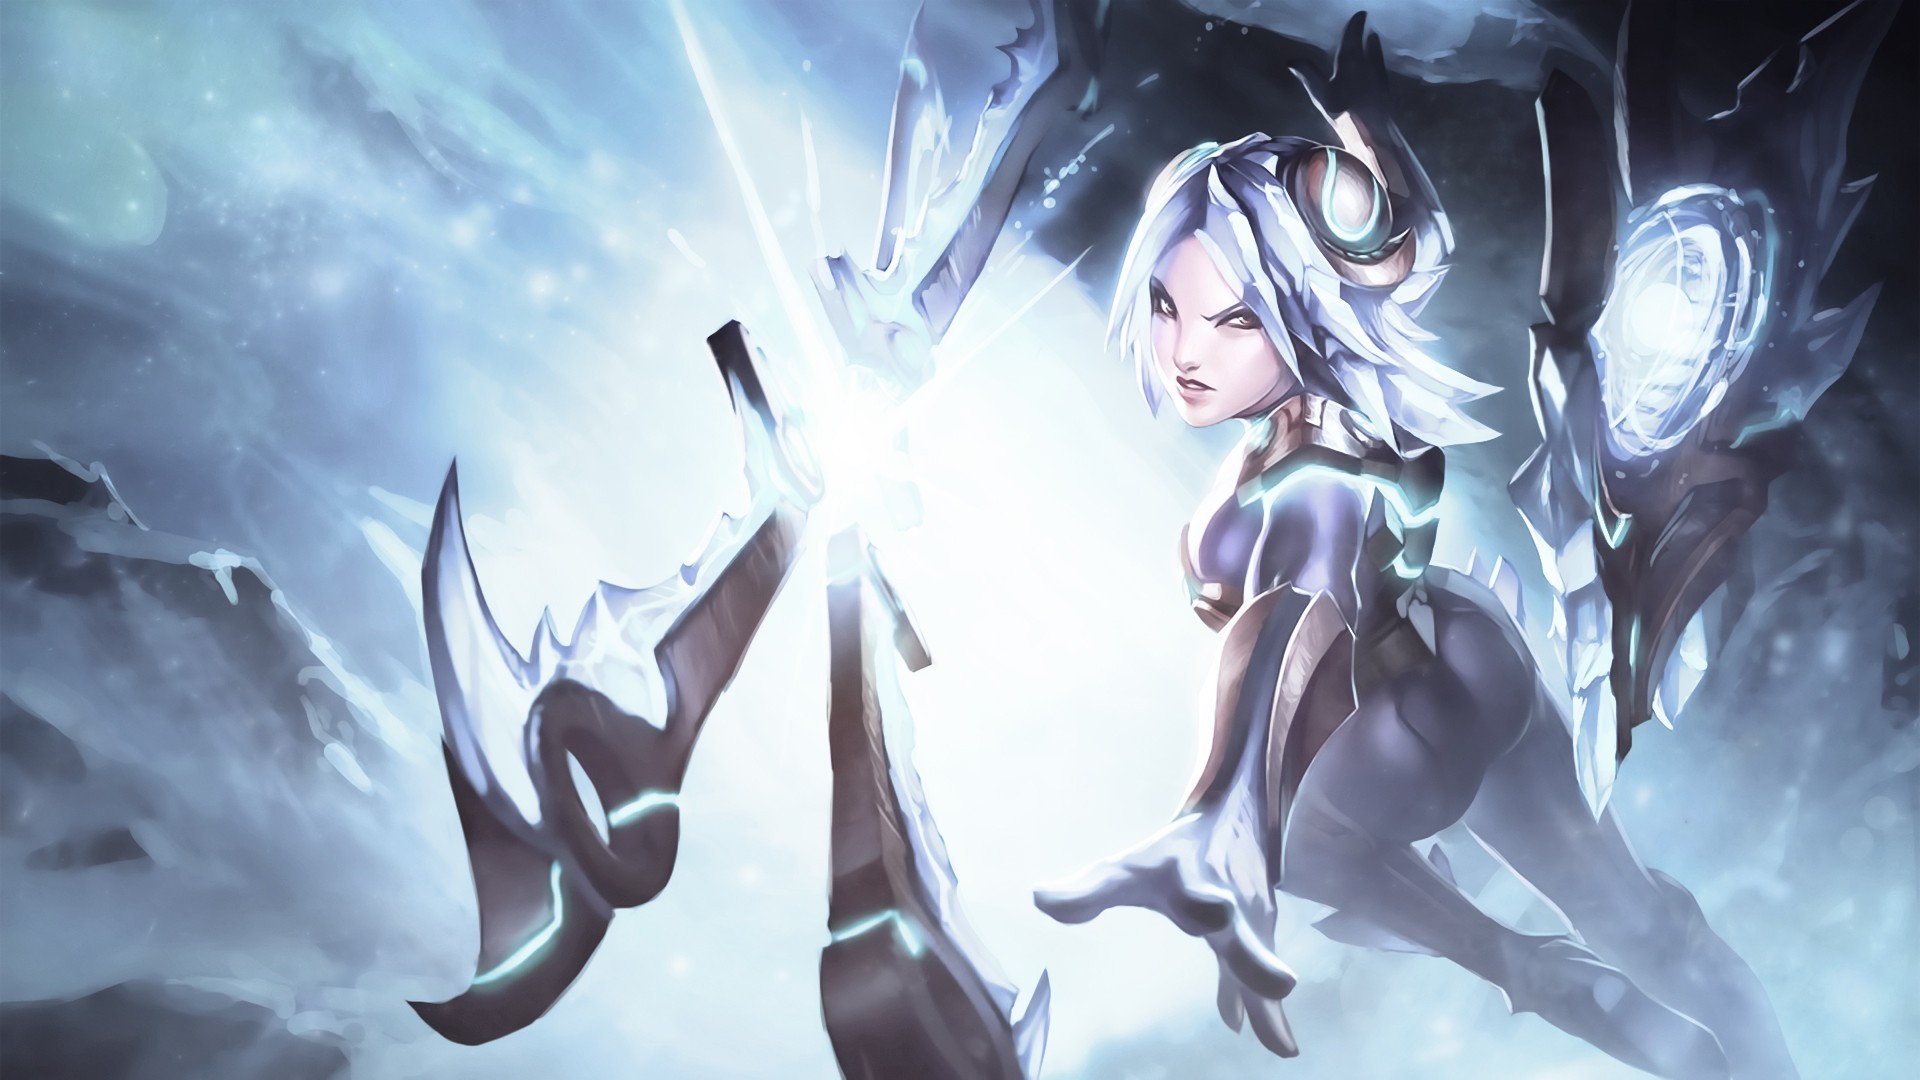 General 1920x1080 League of Legends video games Irelia (League of Legends) PC gaming looking at viewer women fantasy art fantasy girl video game girls